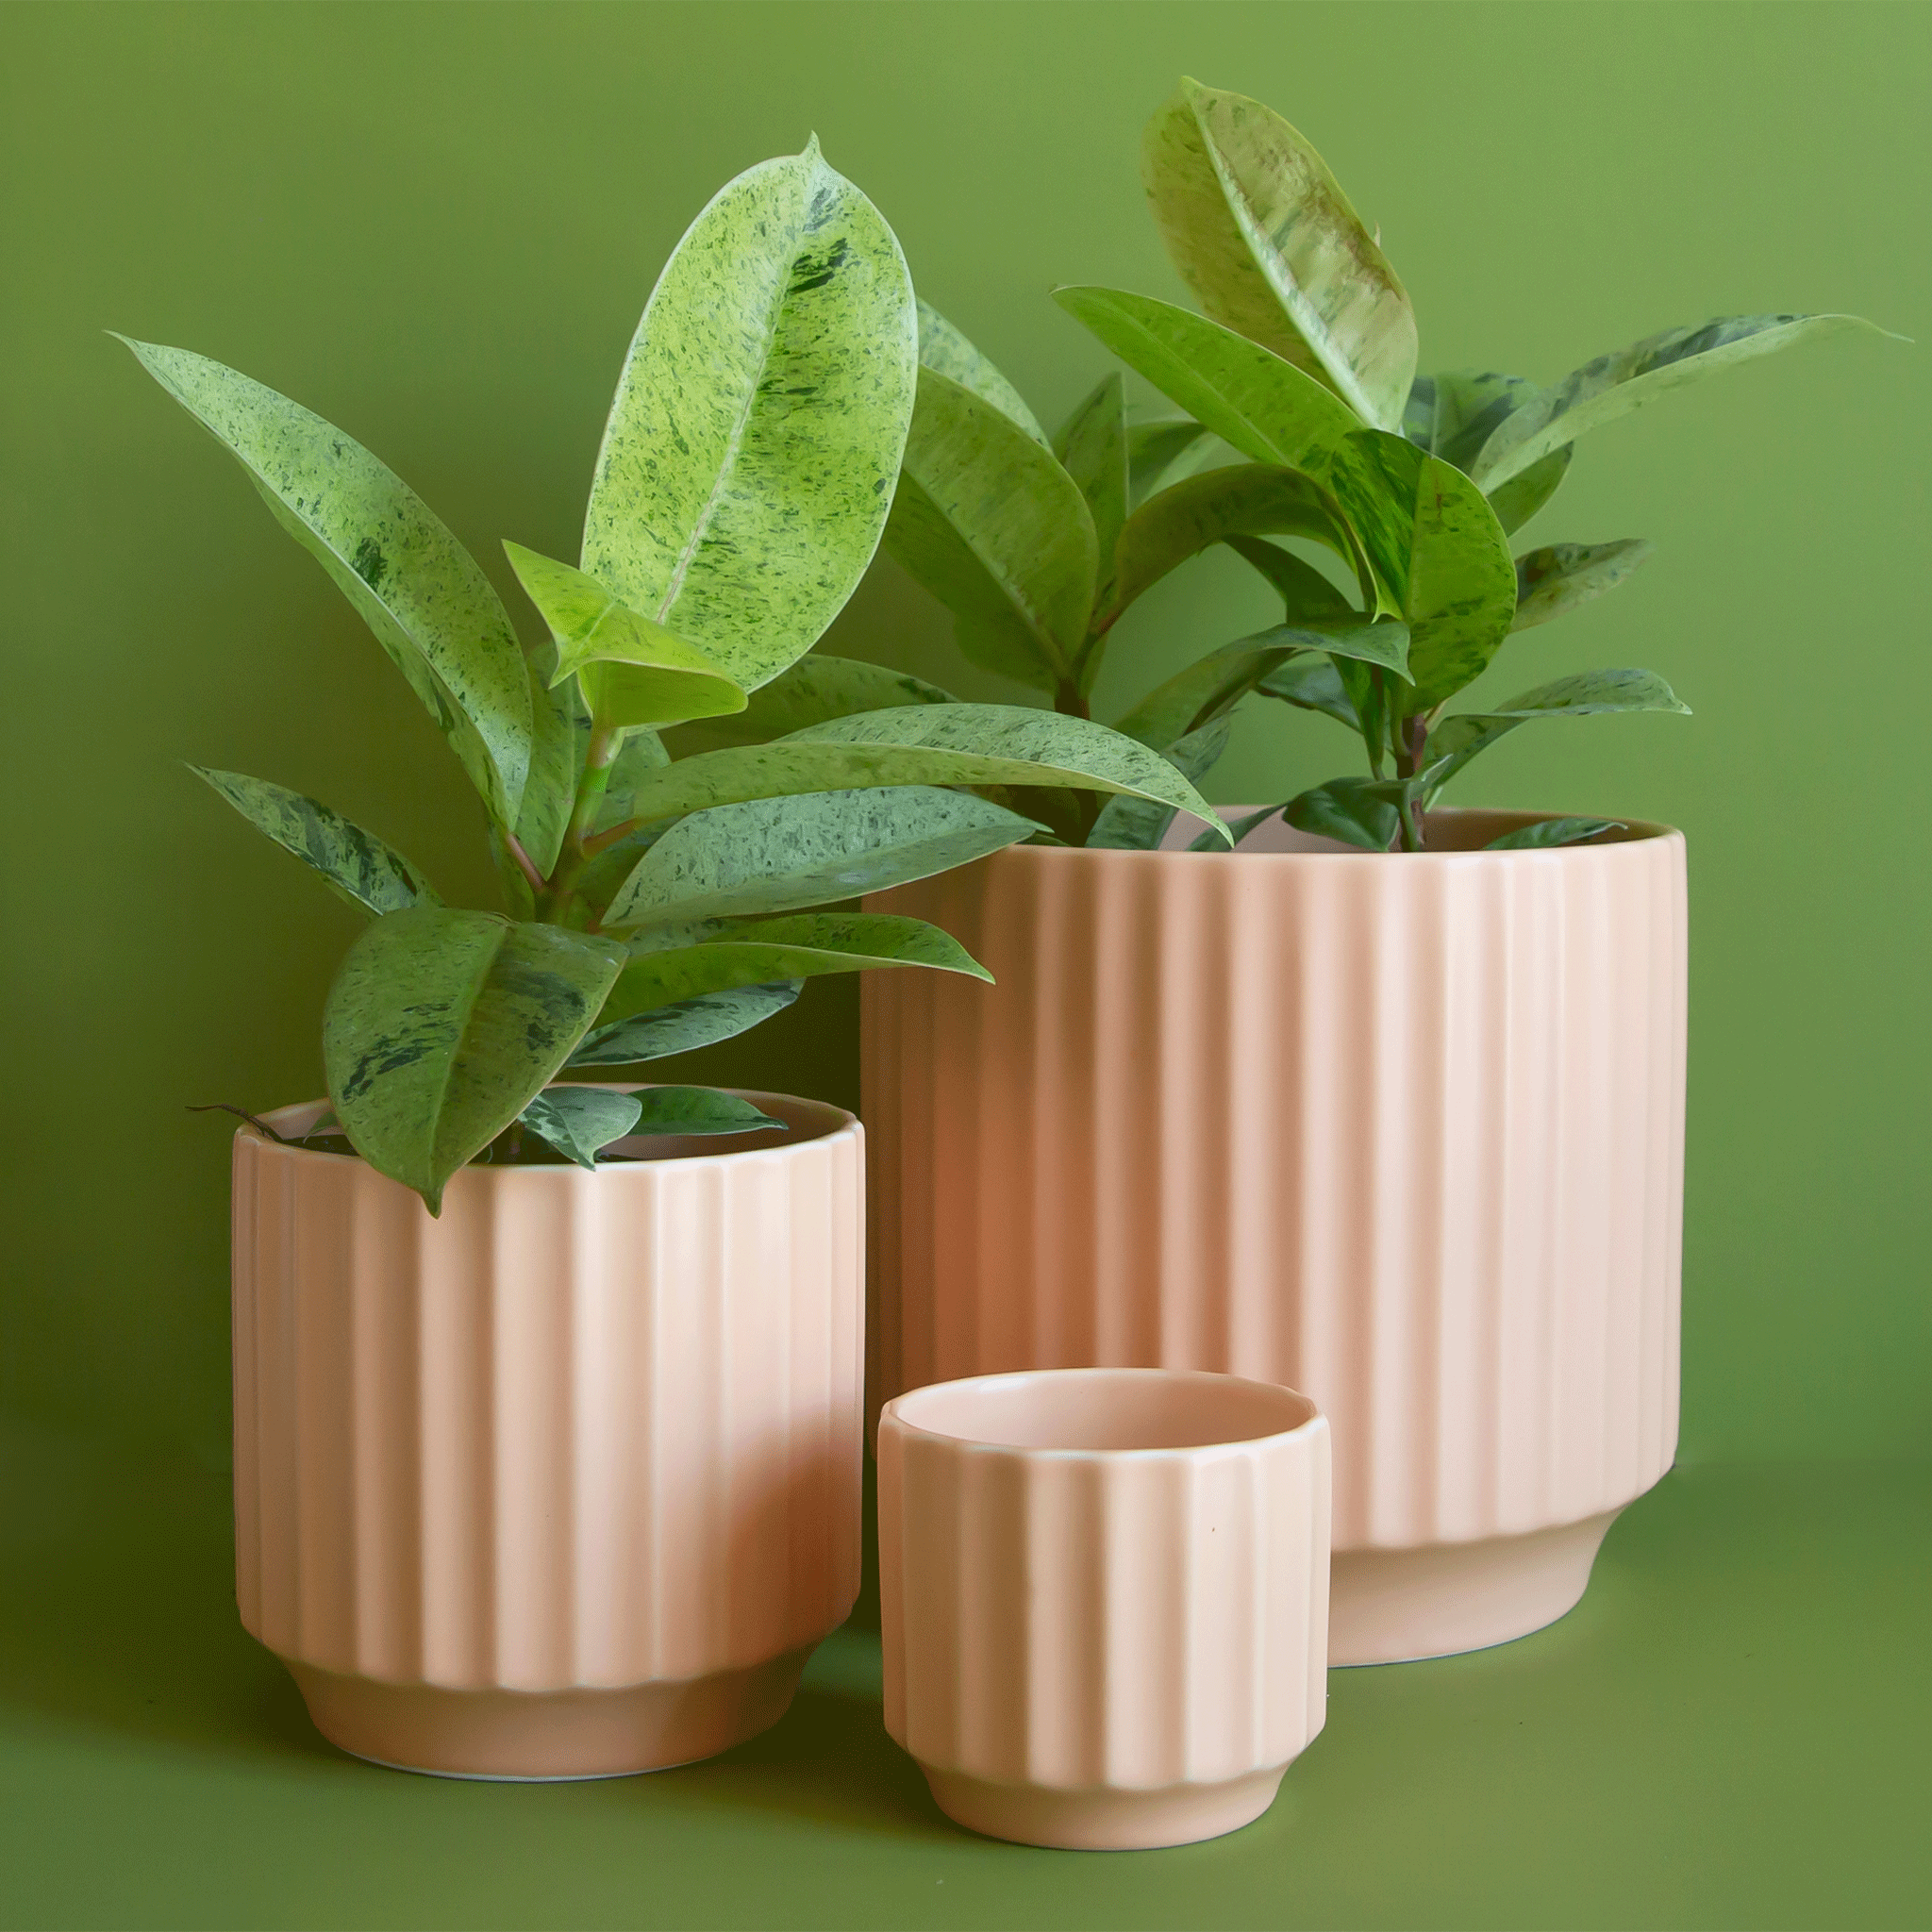 On a green background is three different shaped ceramic pots in a warm toned pink shade.